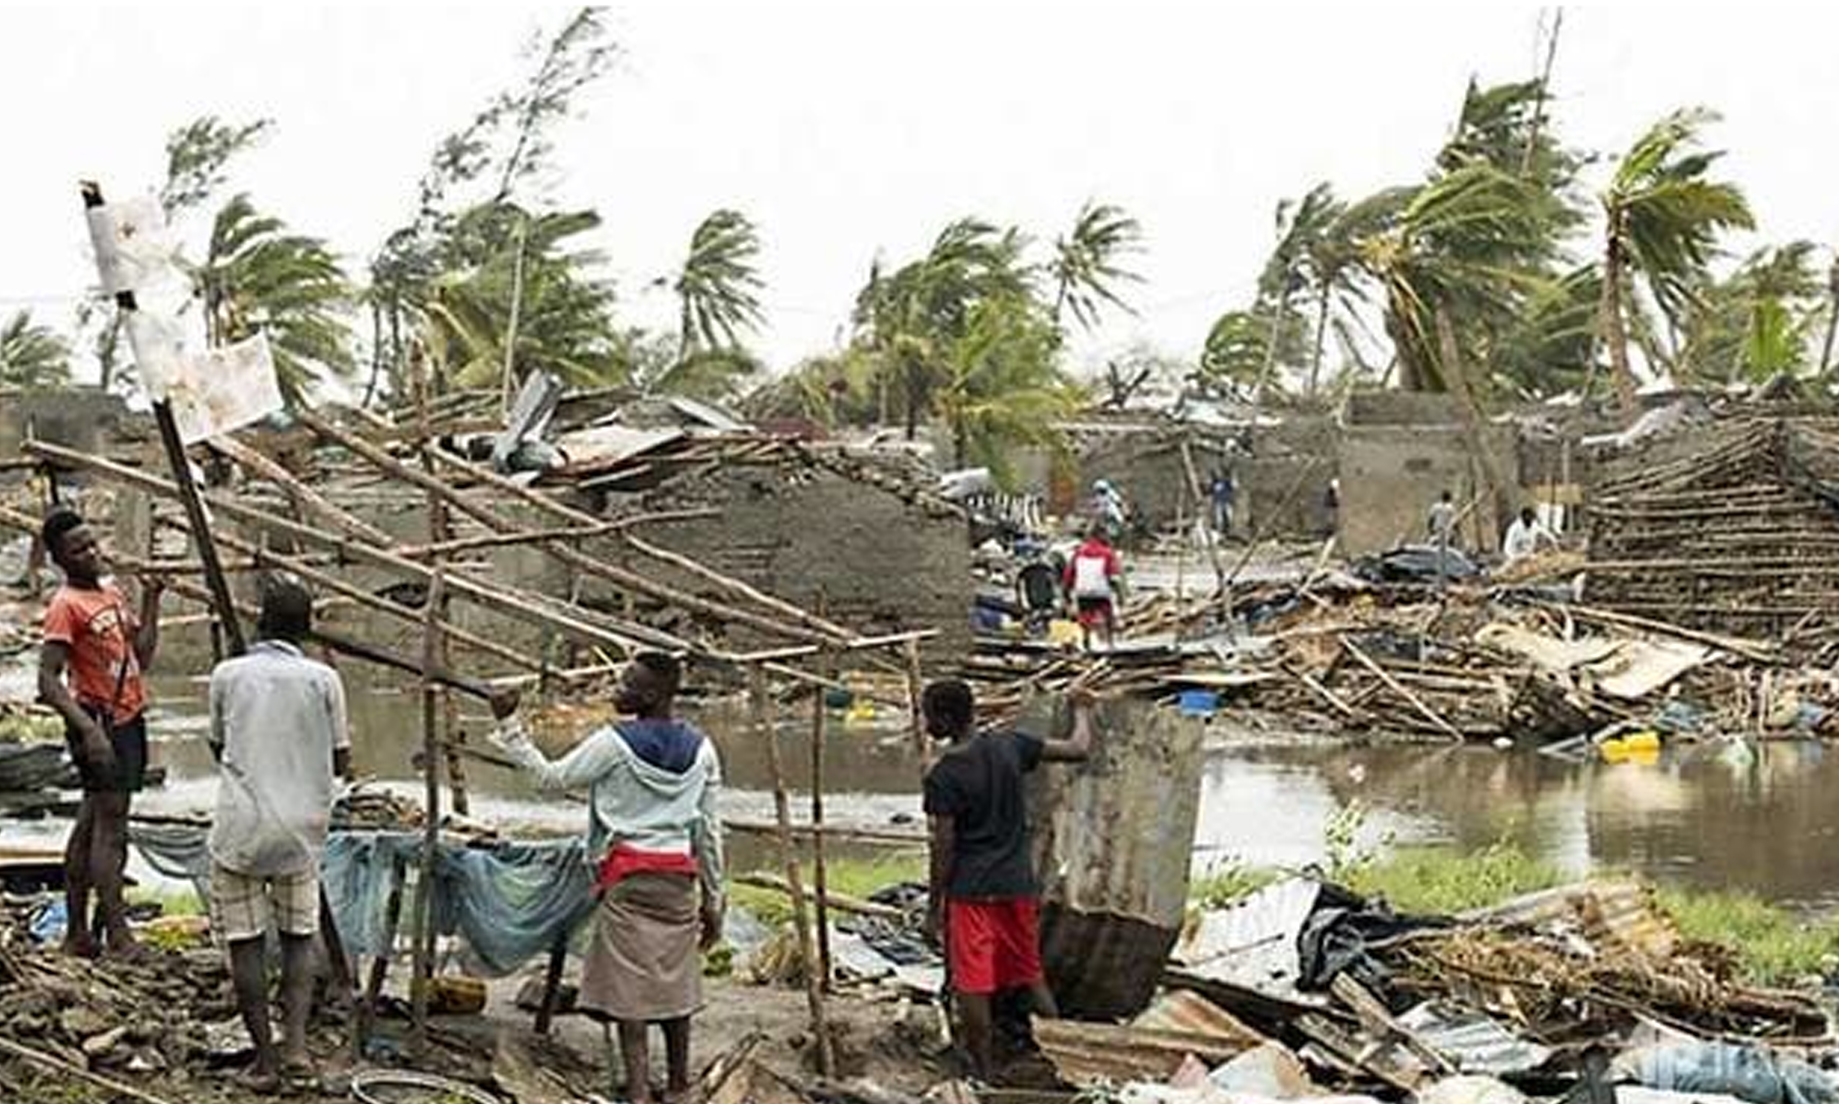 More than 1,000 feared dead in Mozambique cyclone Idai